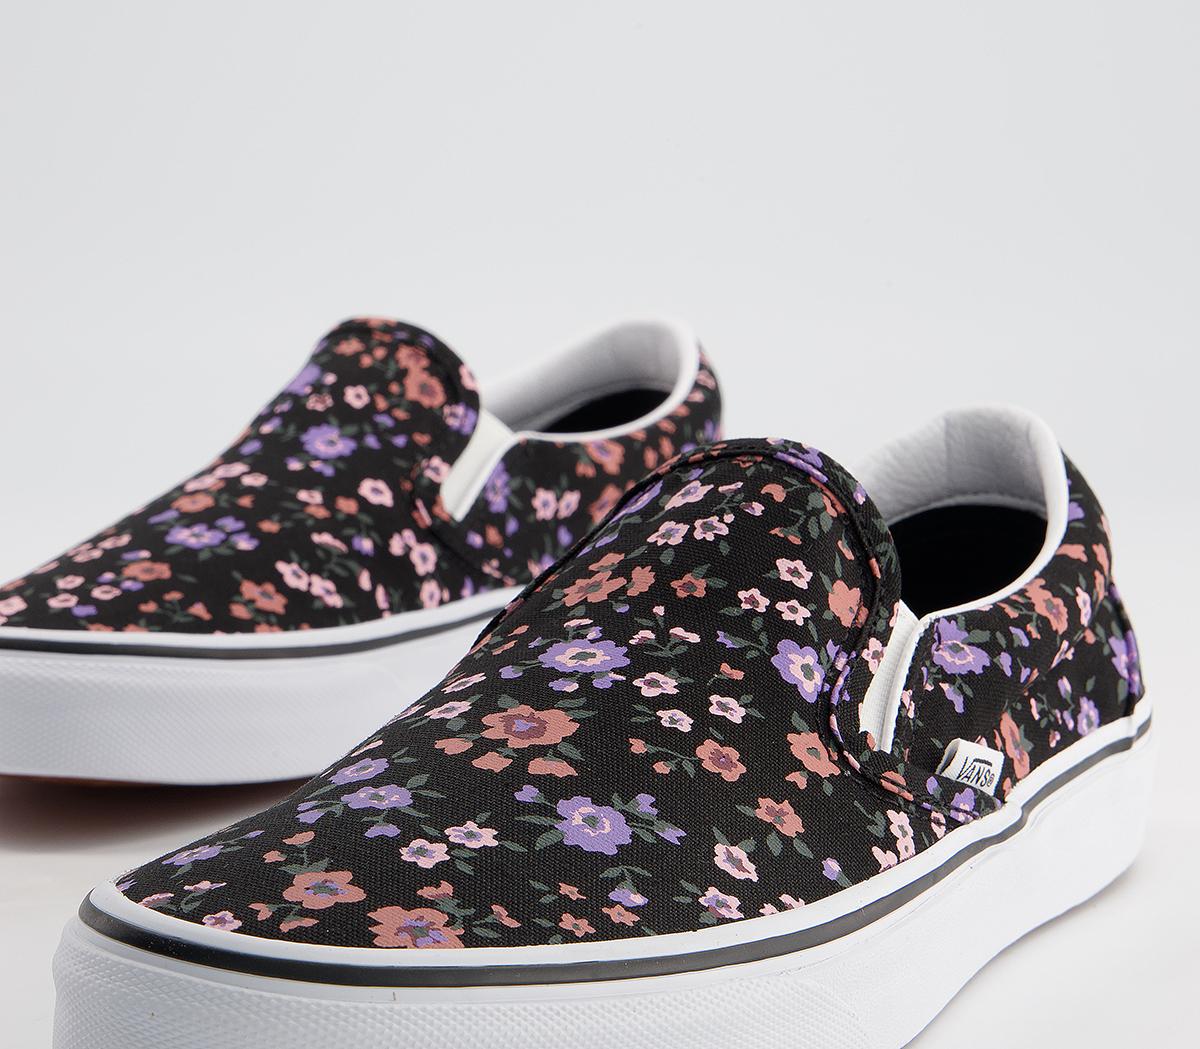 Vans Classic Slip On Trainers Floral Ditsy True White - Hers trainers